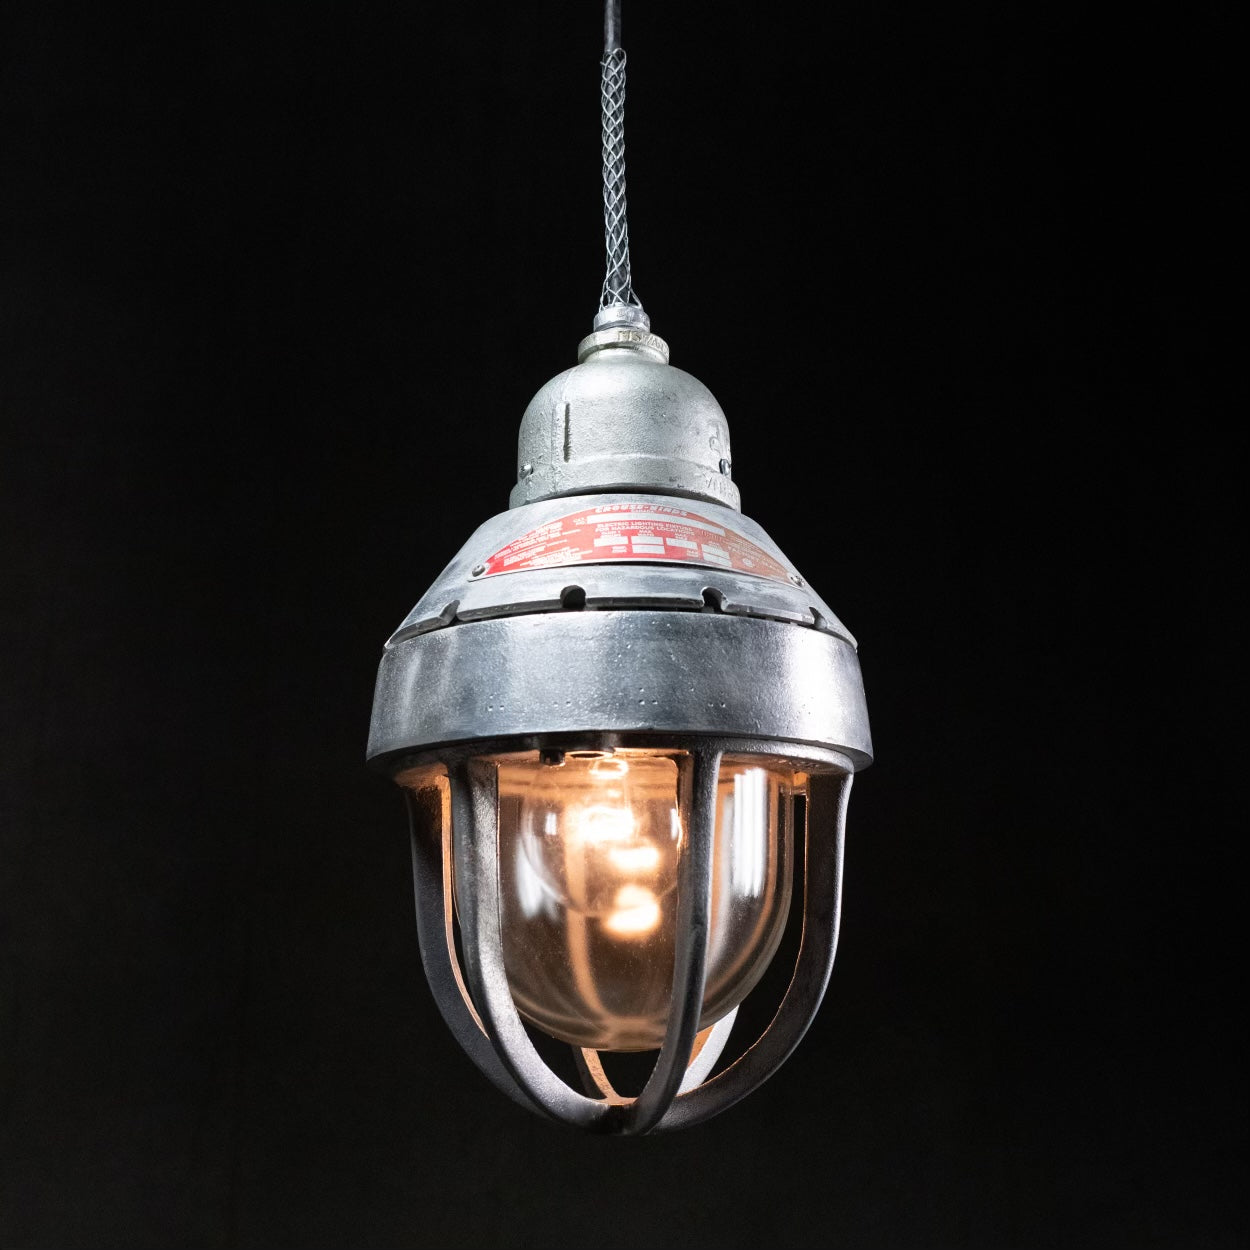 1940 Industrial Vapour Proof Glass Pendant Light by Crouse-Hinds